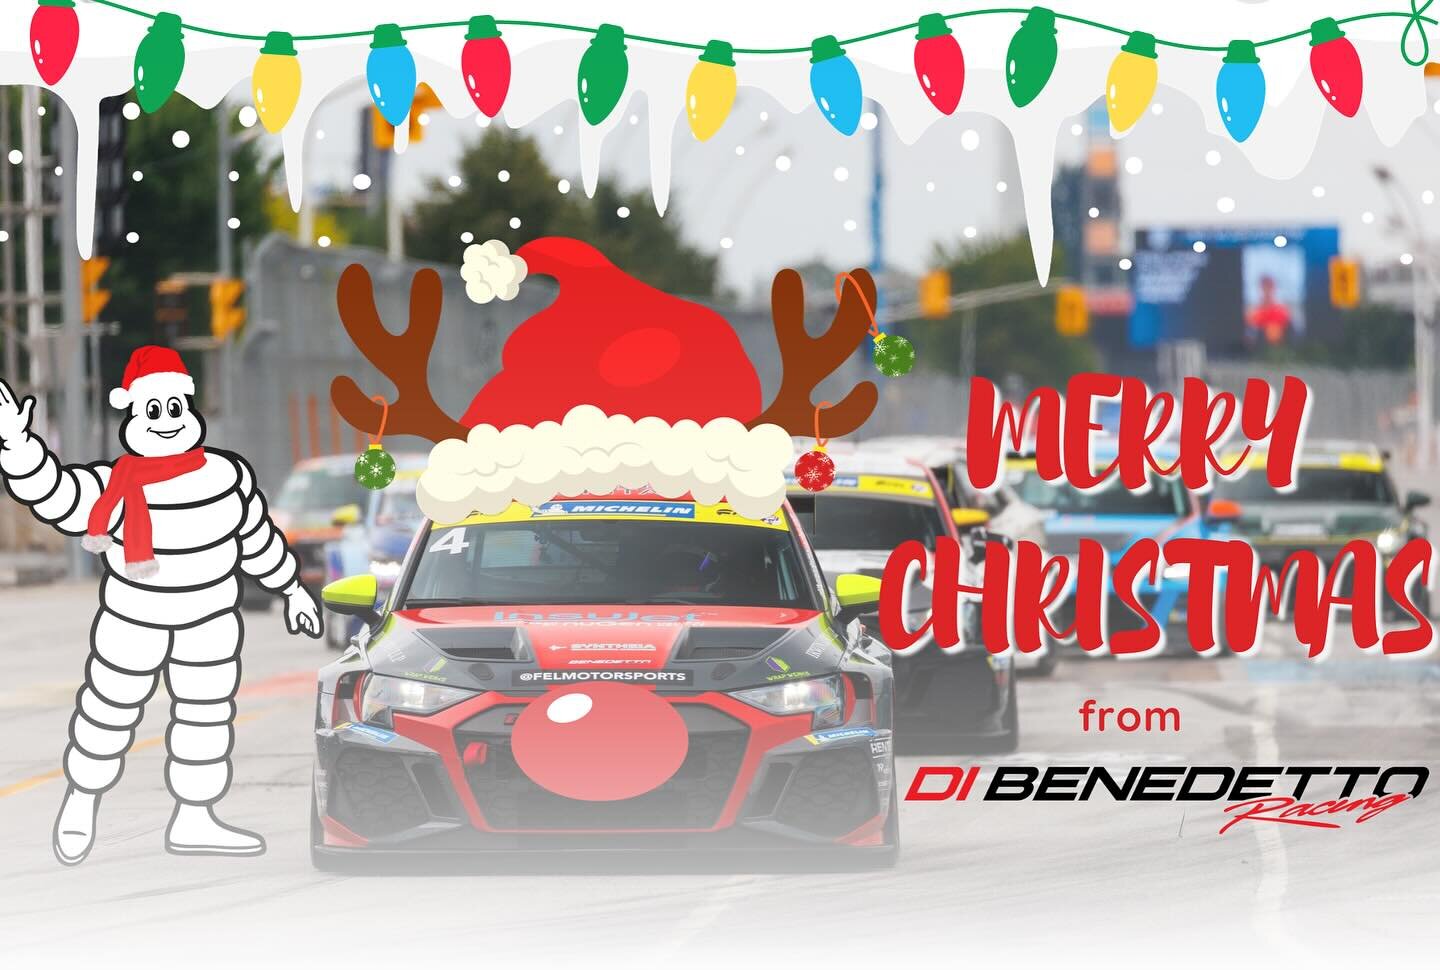 Wishing everyone a Merry Christmas and Happy Holidays from all of us at Di Benedetto Racing! 🎄✨🏎️🎁🎅🏻

#merrychristmas #dibenedettoracing #audisport